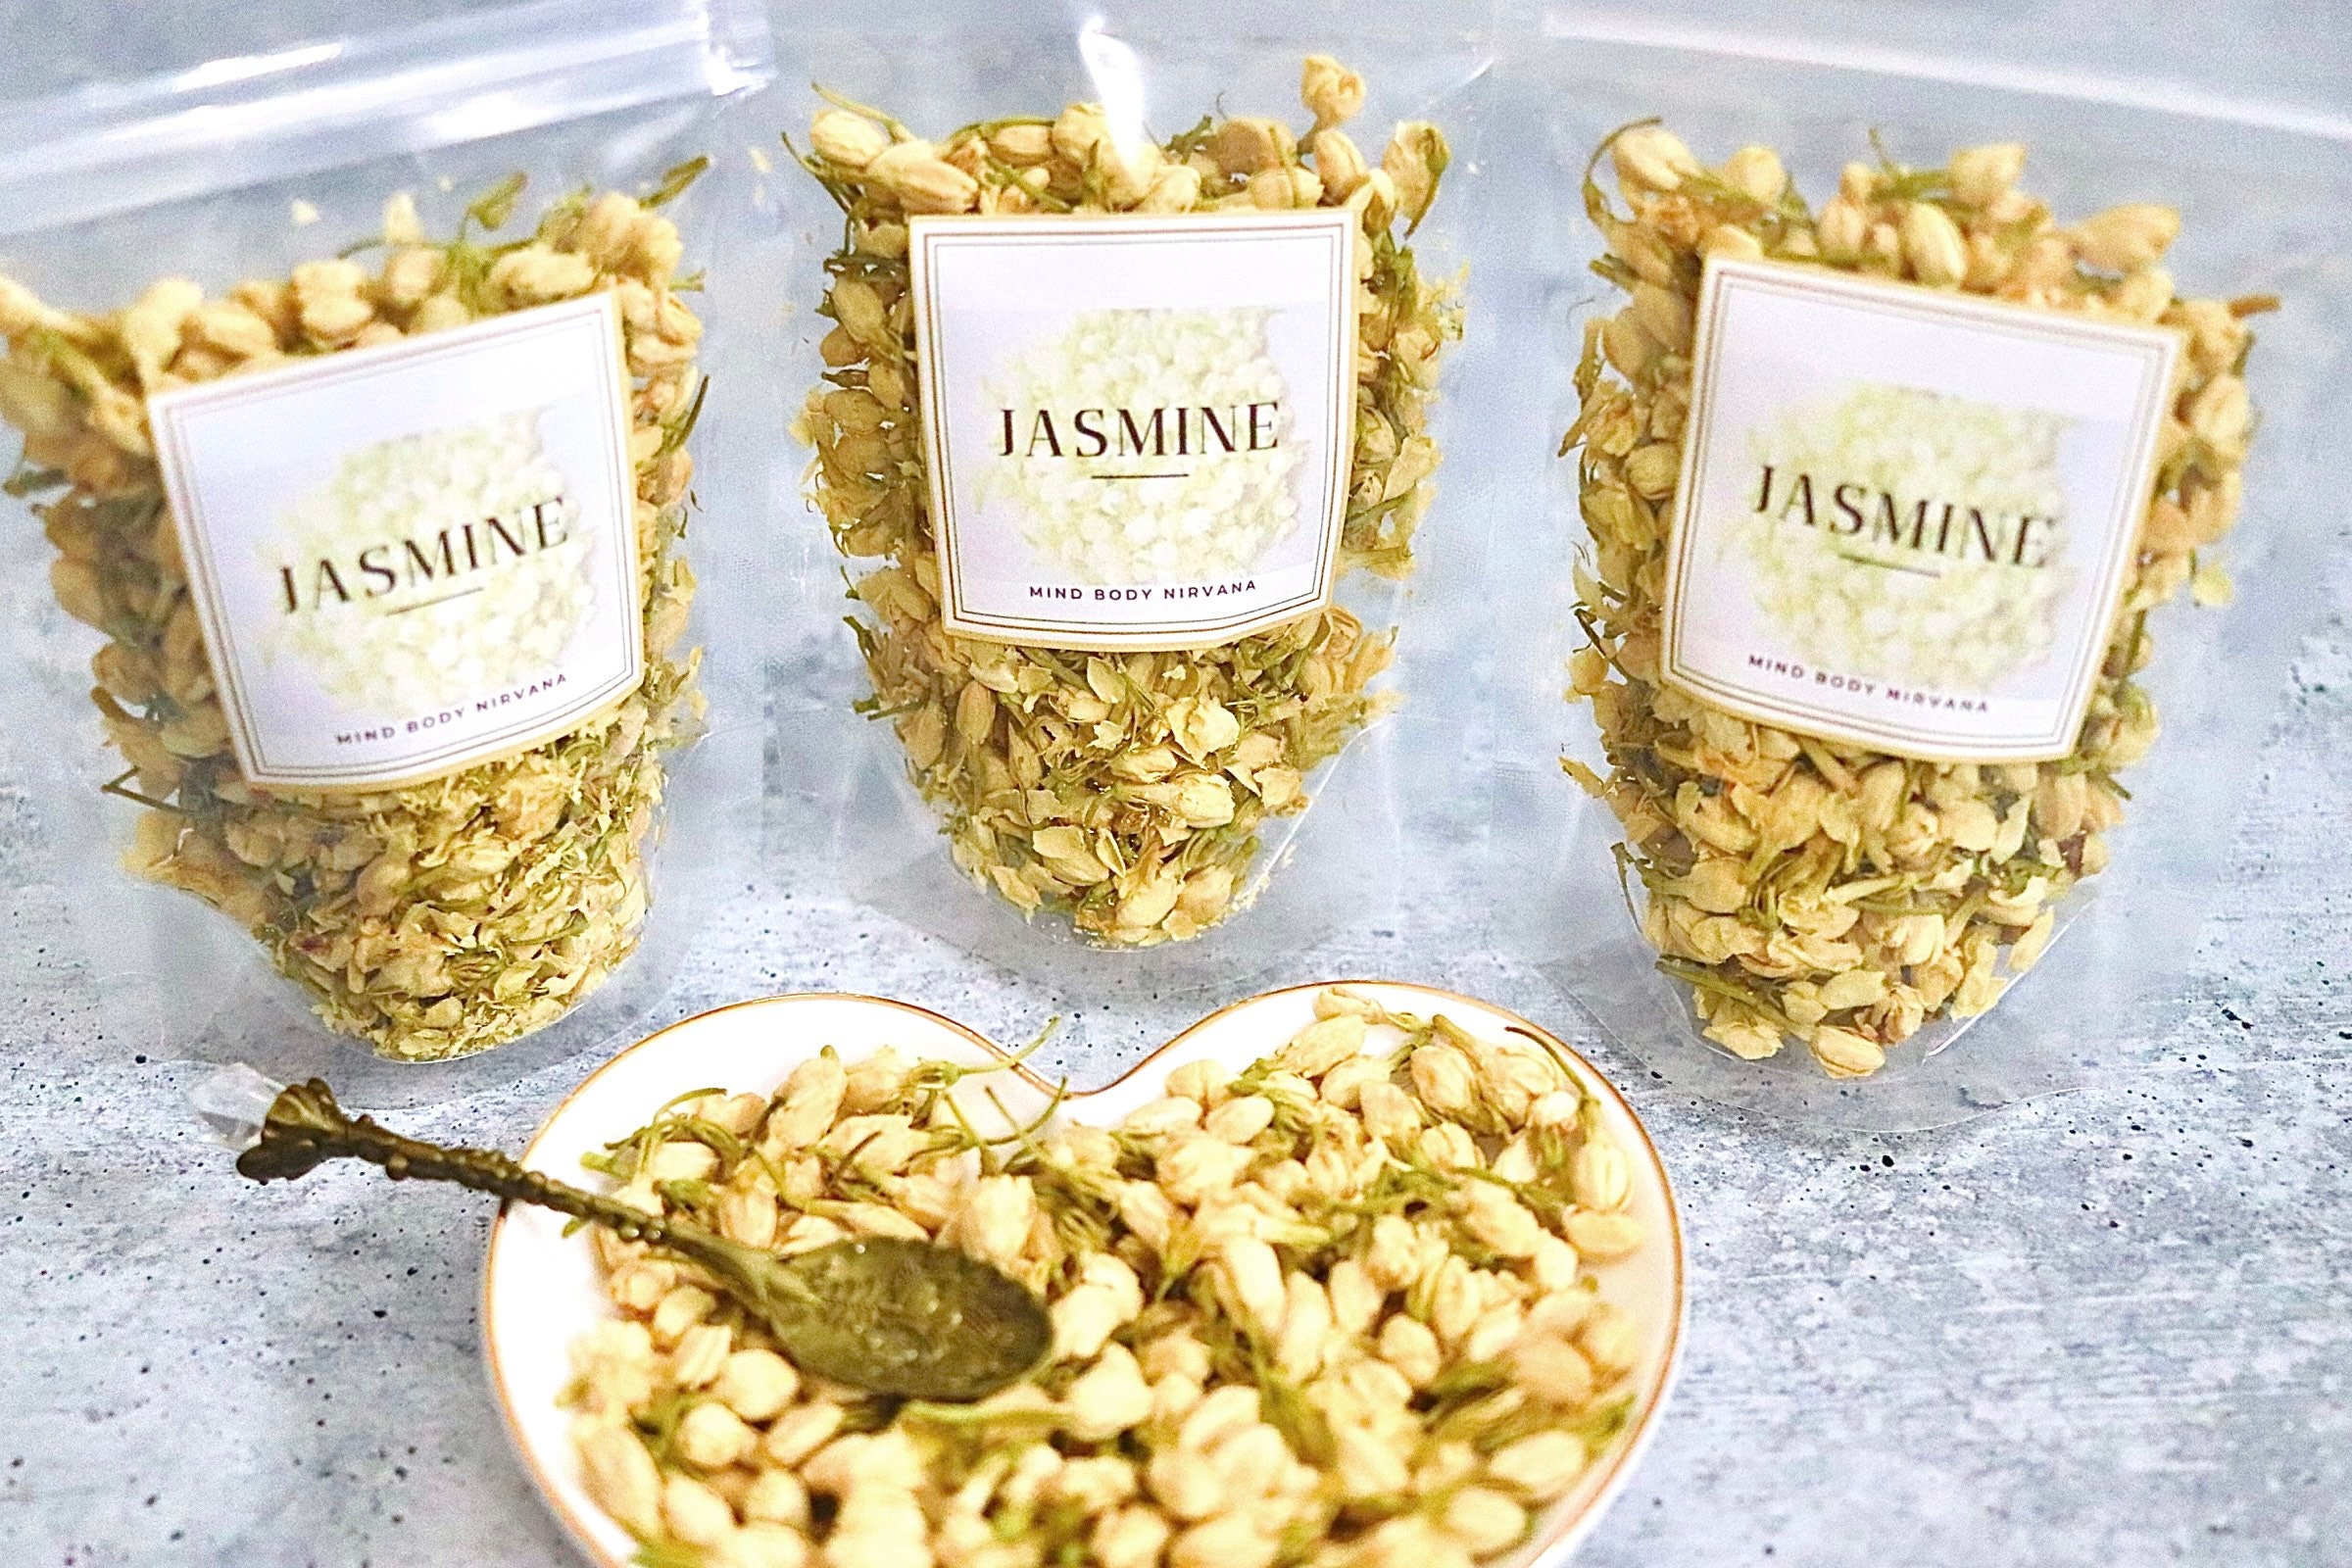 JASMINE FLOWER APOTHERCARY. Dried Herb For Love, Meditation & Enlighte –